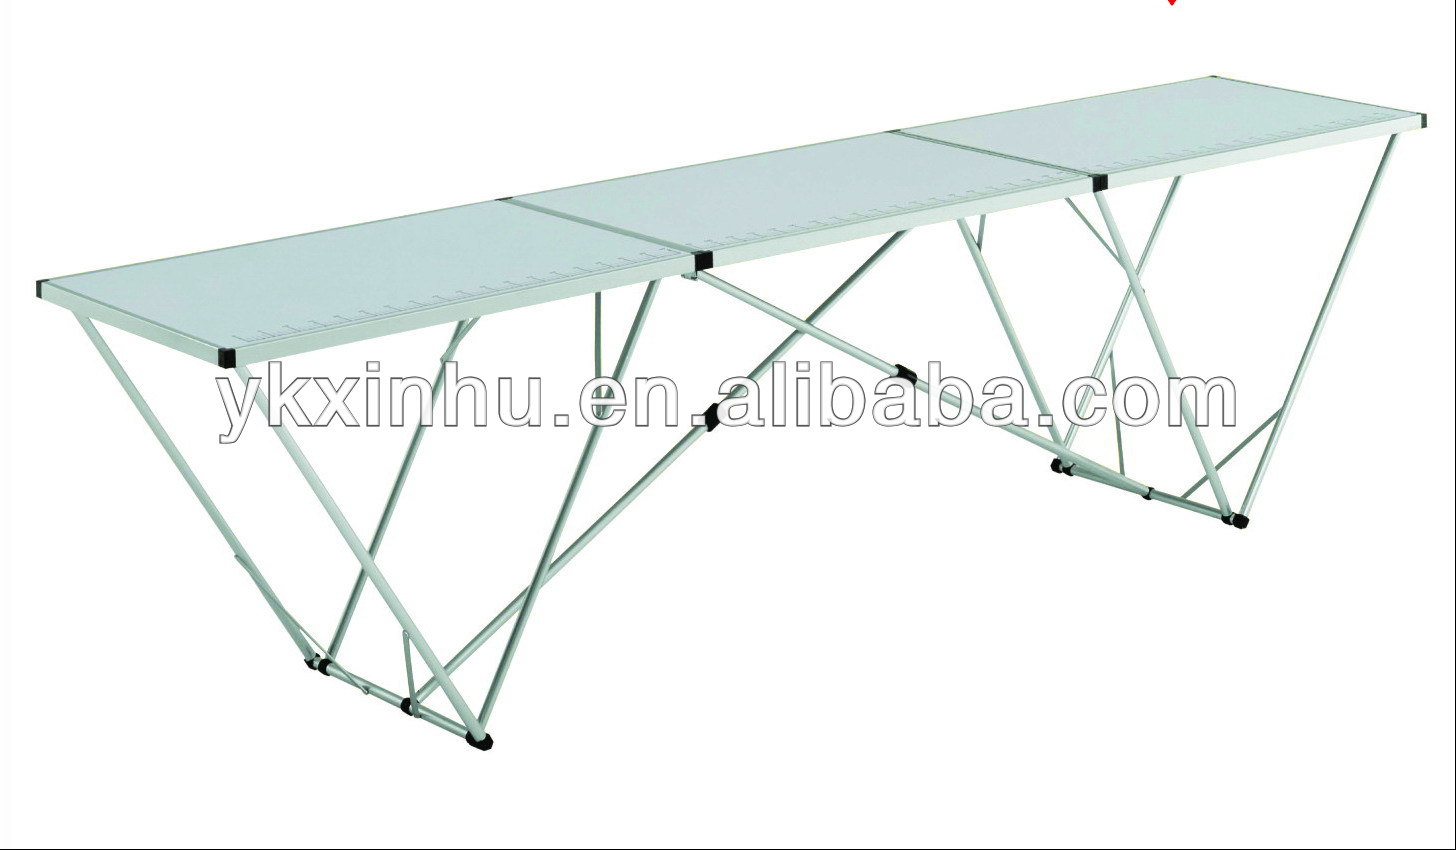 Wallpaper Pasting Table Work Xinhu Product